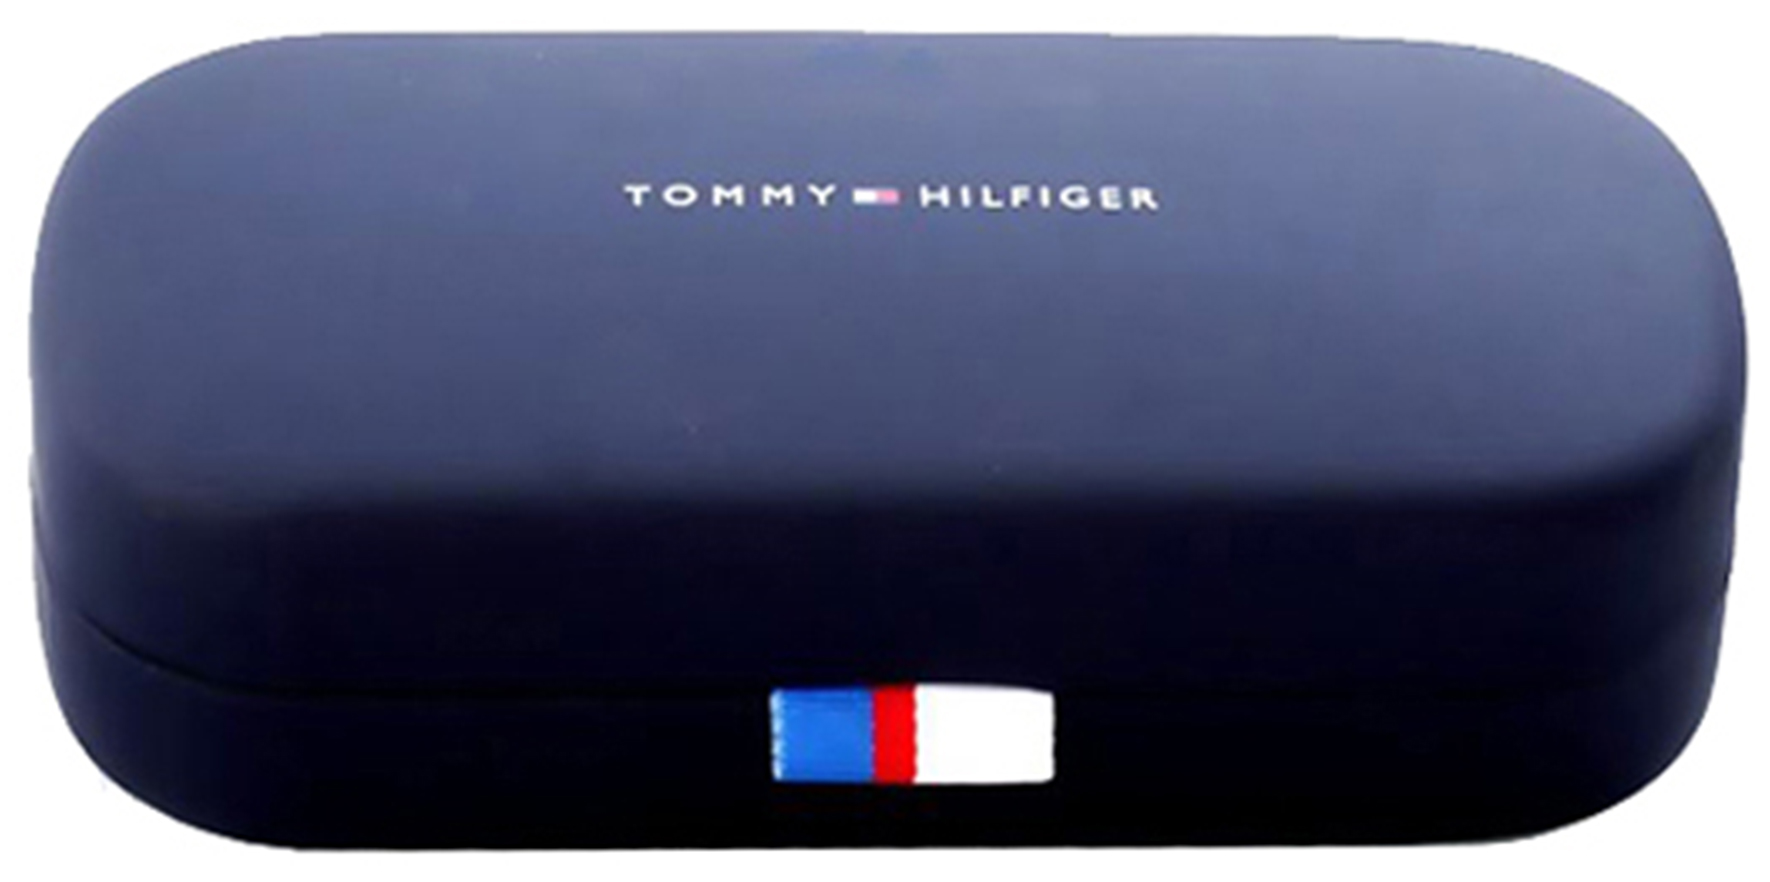 Tommy Hilfiger Black Rounded Square Classic